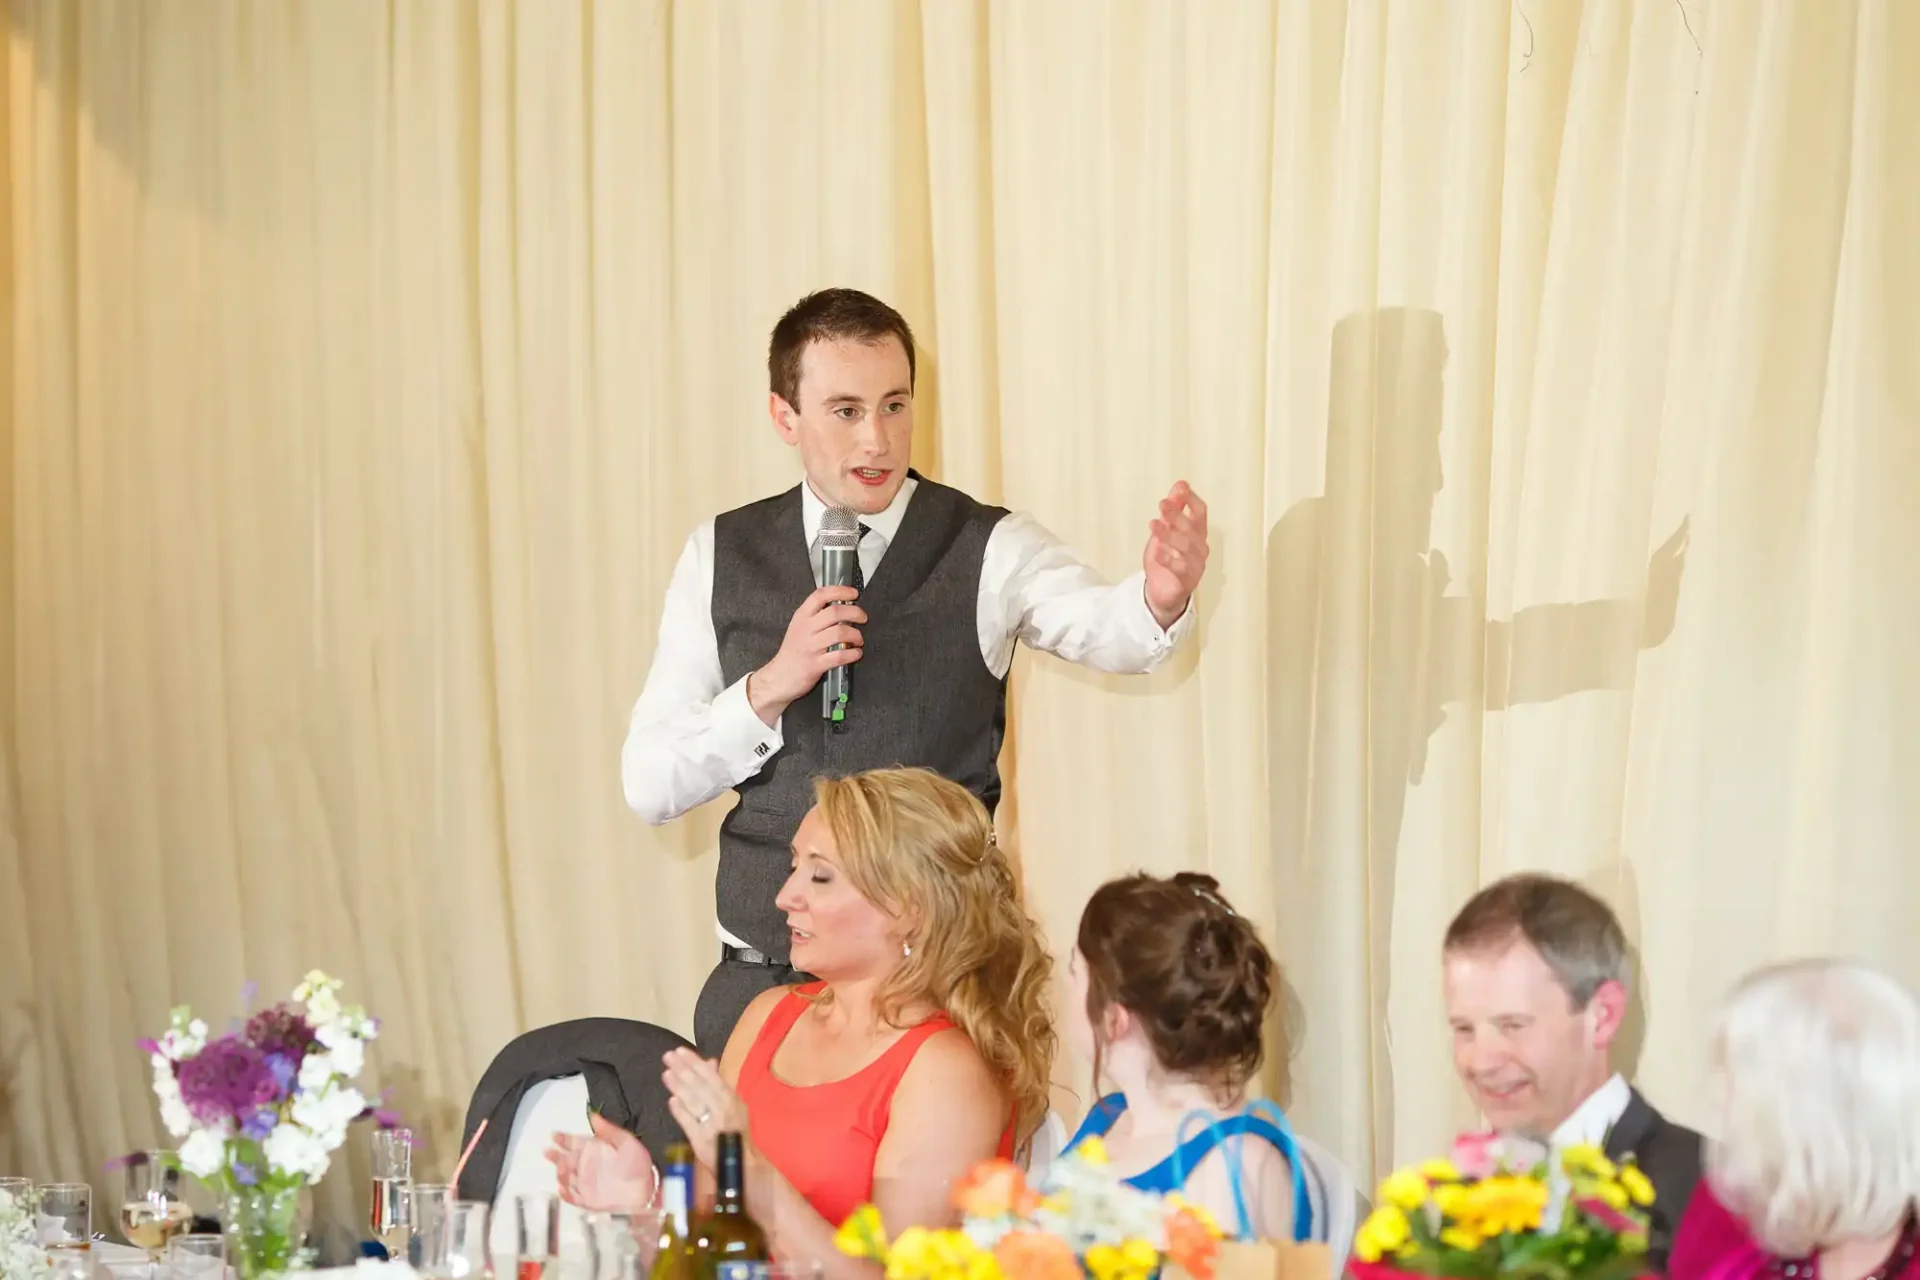 A young man stands giving a speech at a wedding, gesturing with one hand, while holding a microphone with the other. around him, guests seated at tables listen attentively.